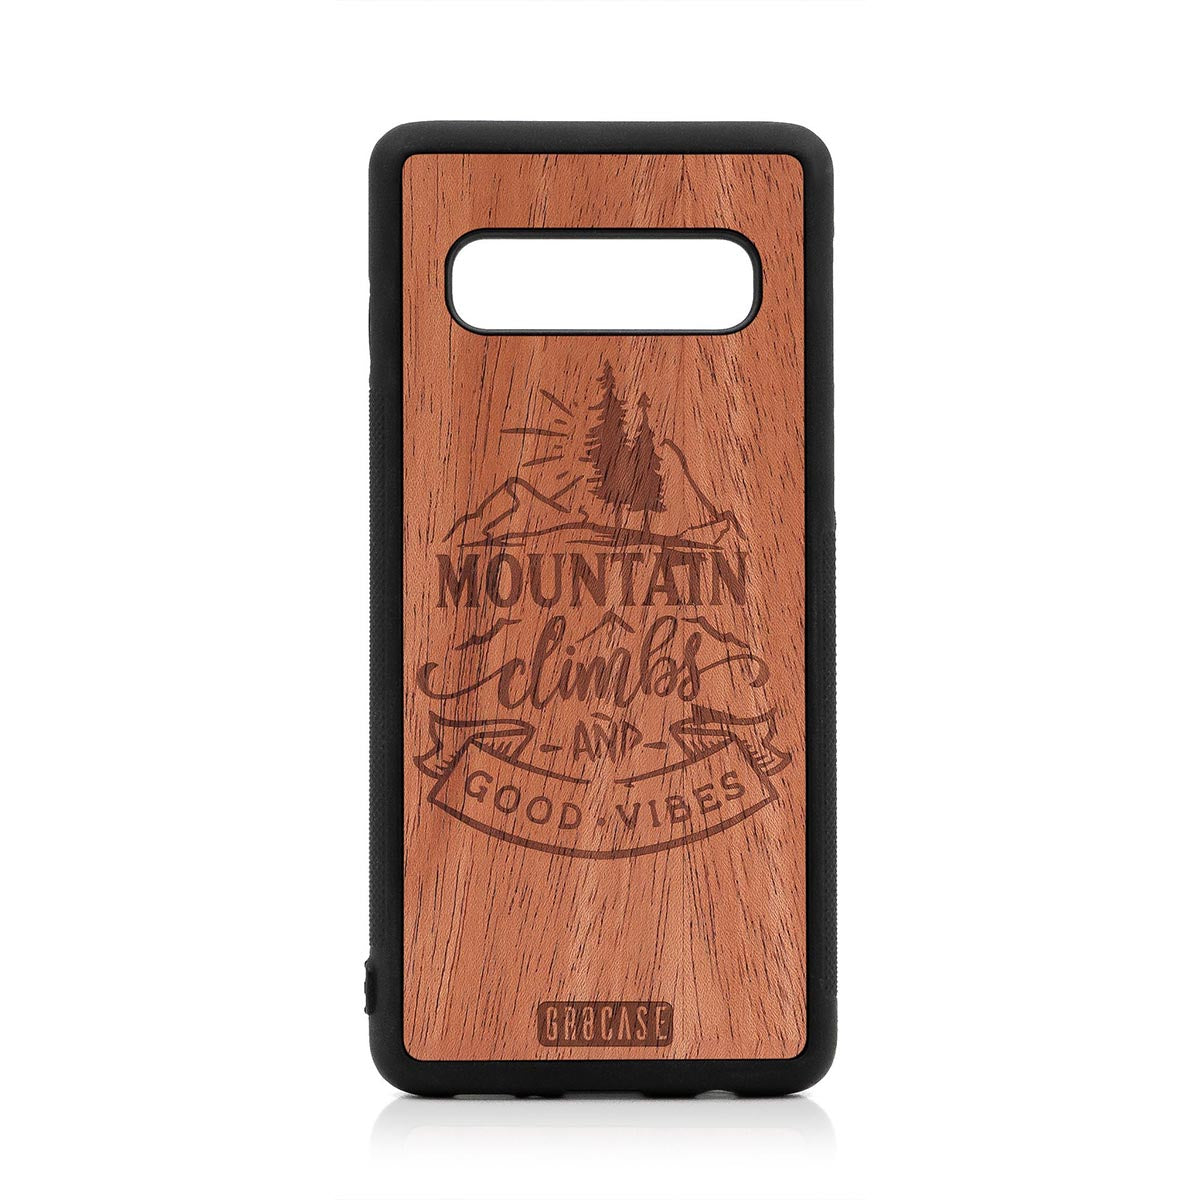 Mountain Climbs And Good Vibes Design Wood Case For Samsung Galaxy S10 by GR8CASE